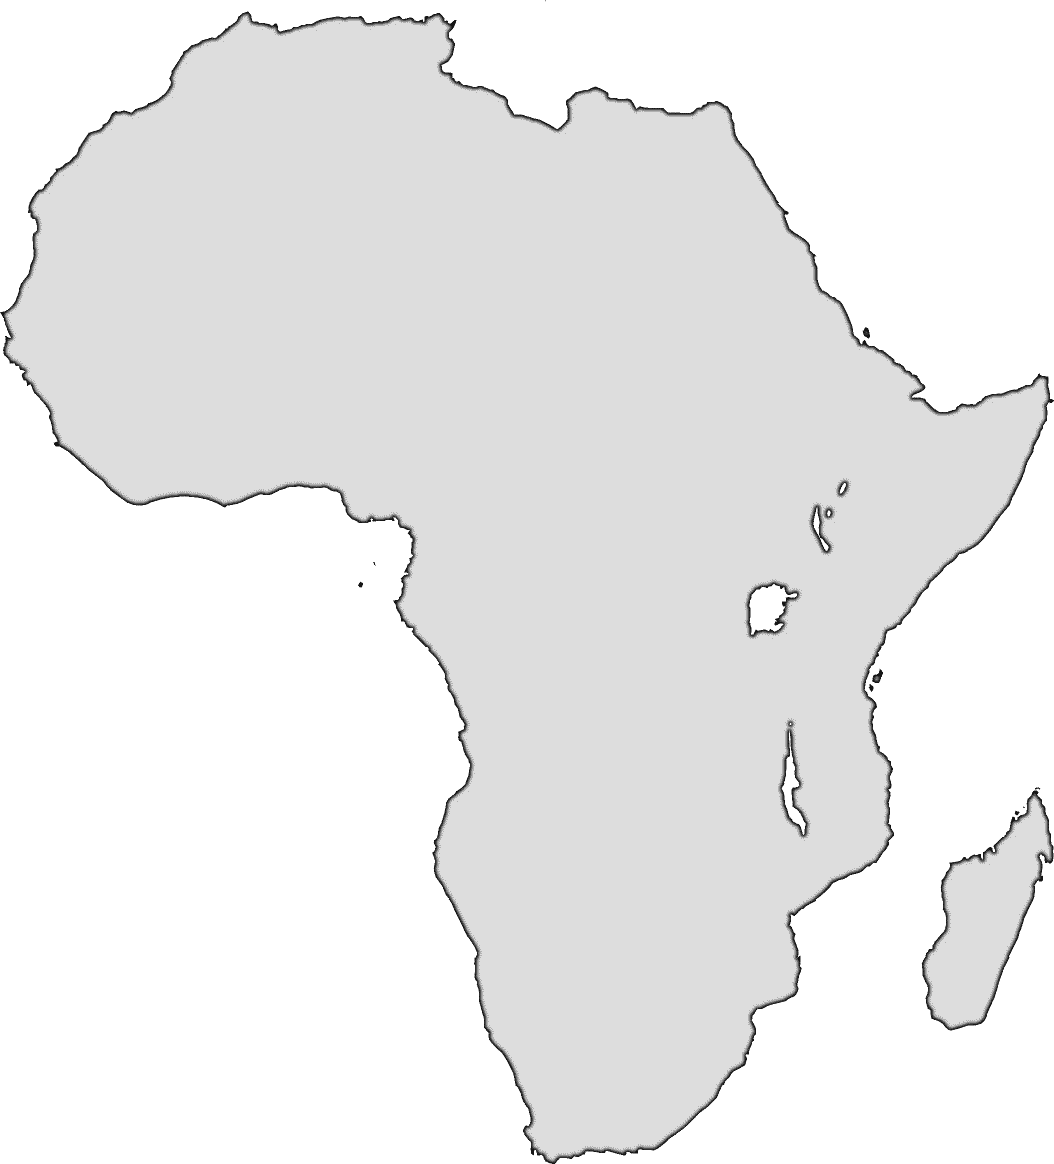 Africa clipart continent africa. Image large bw png